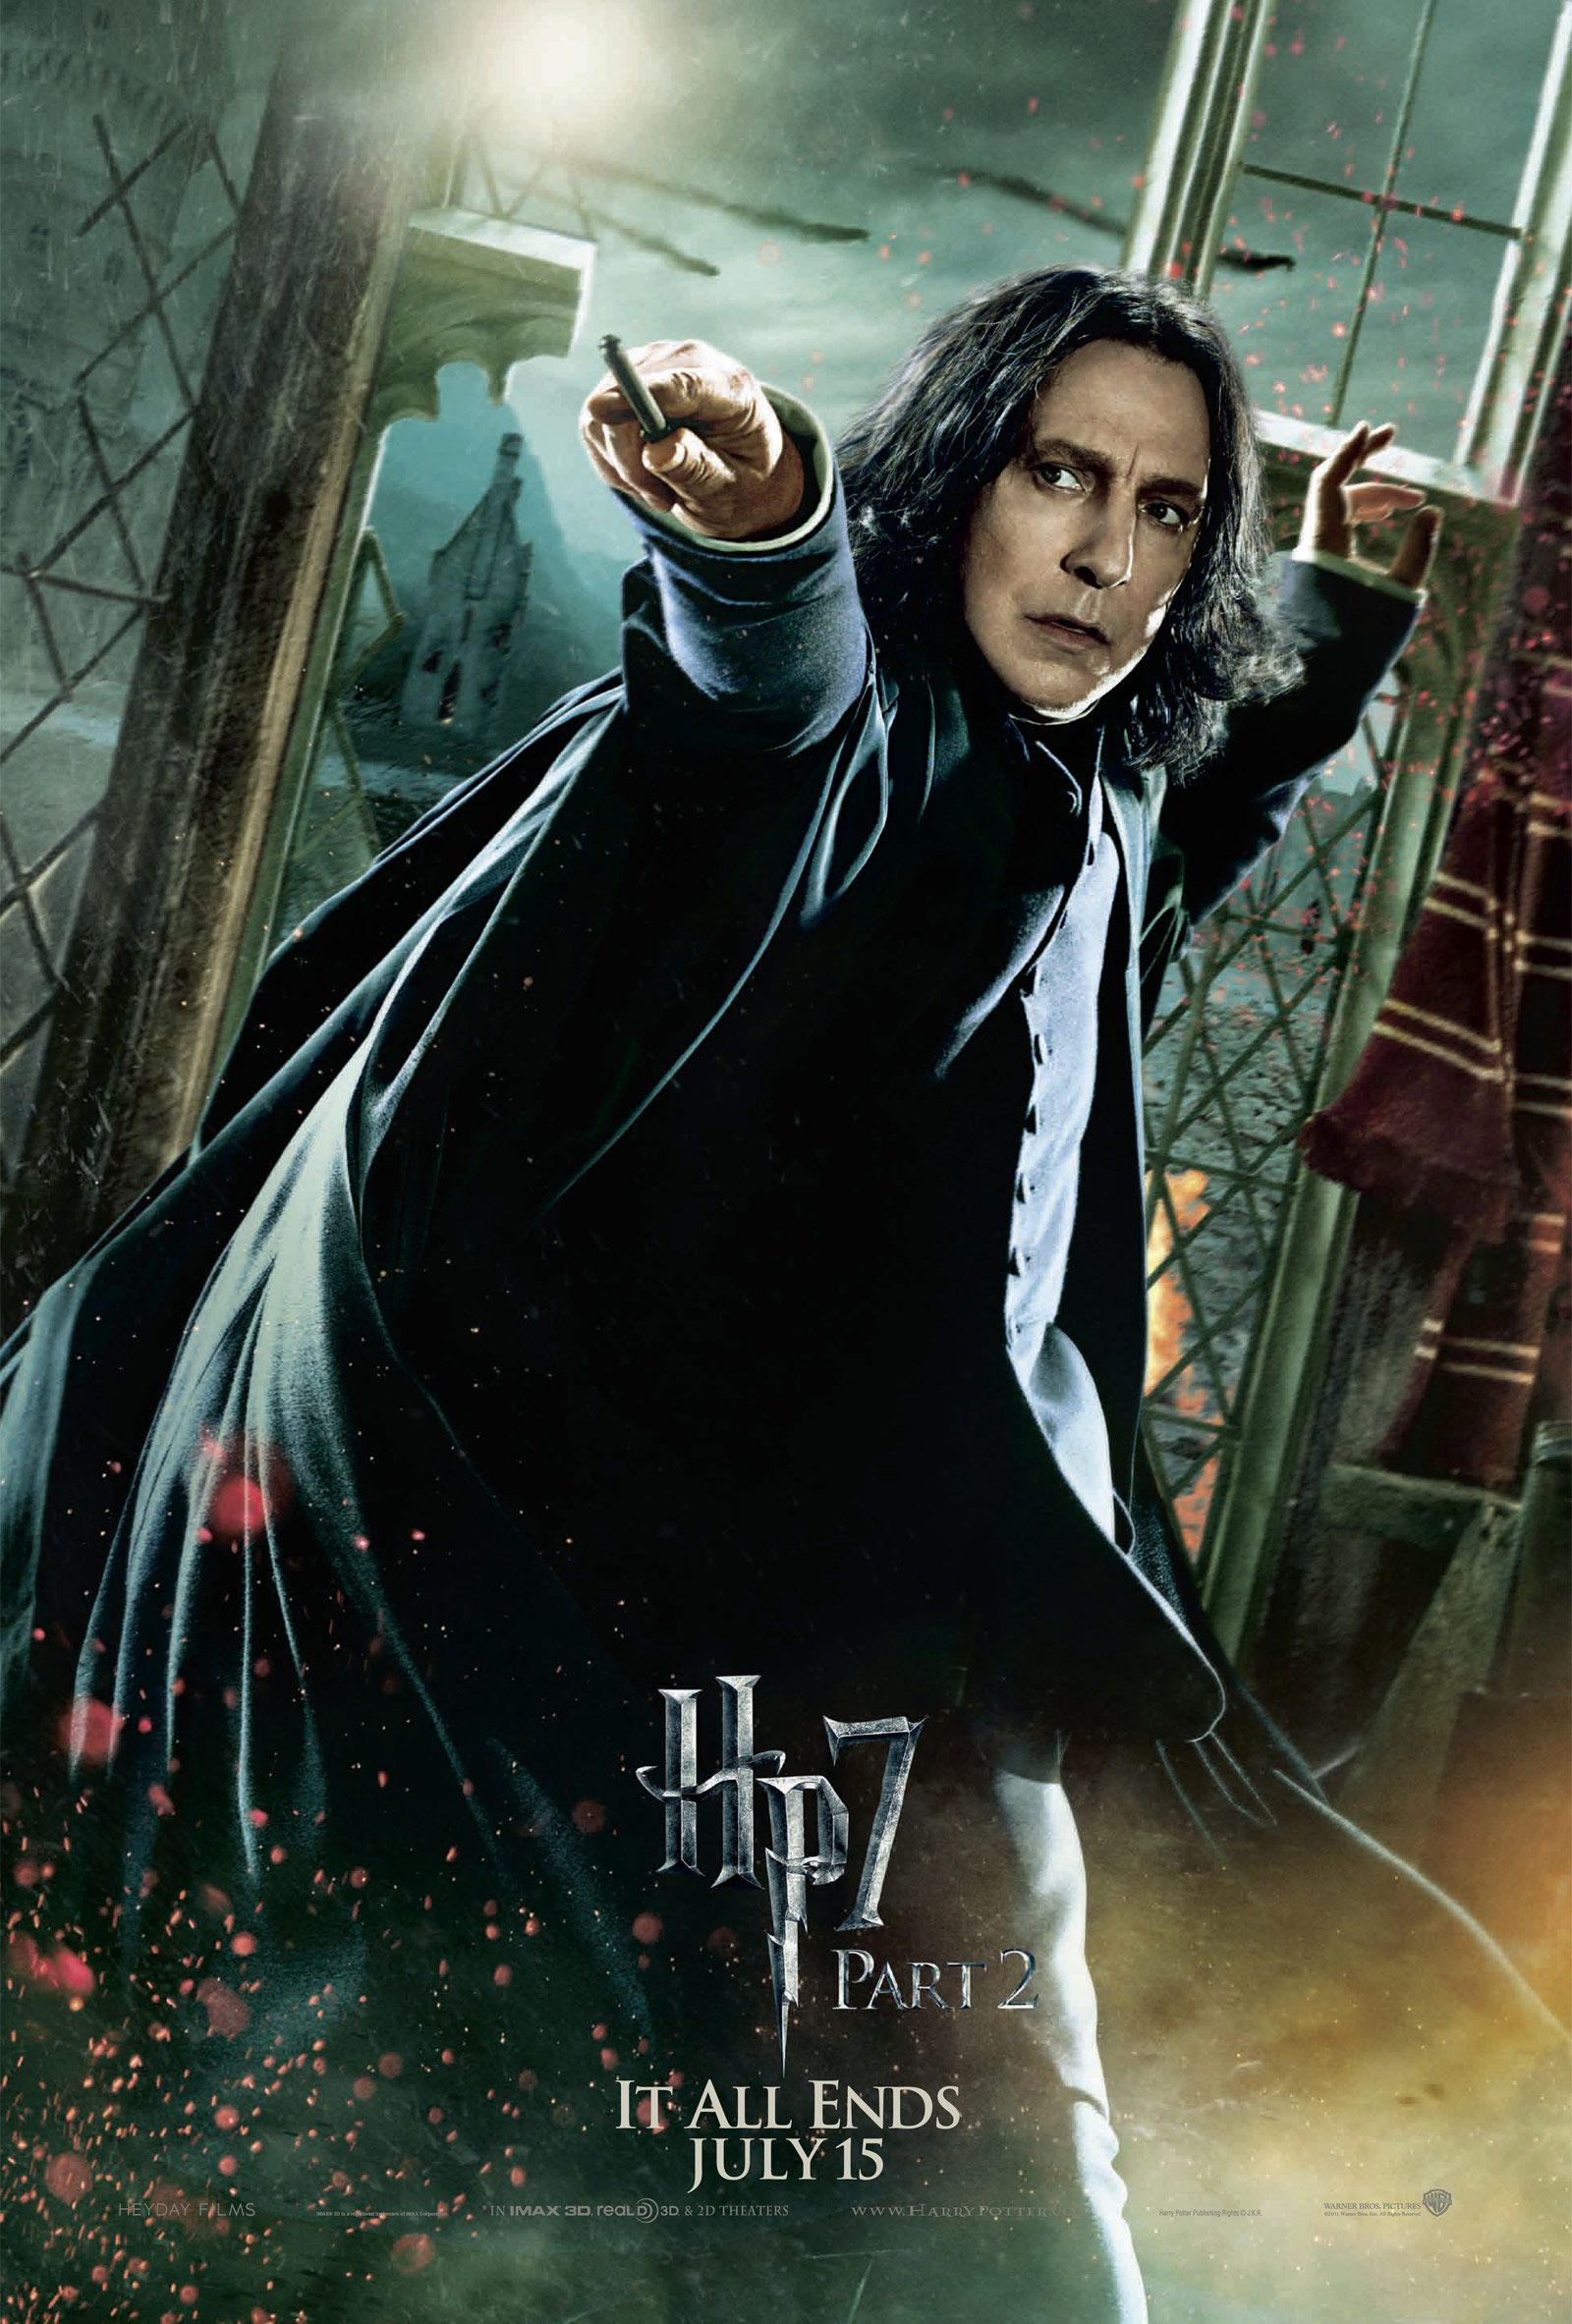 Harry Potter and the Deathly Hallows - Part 2 Serverus Snape Character Poster